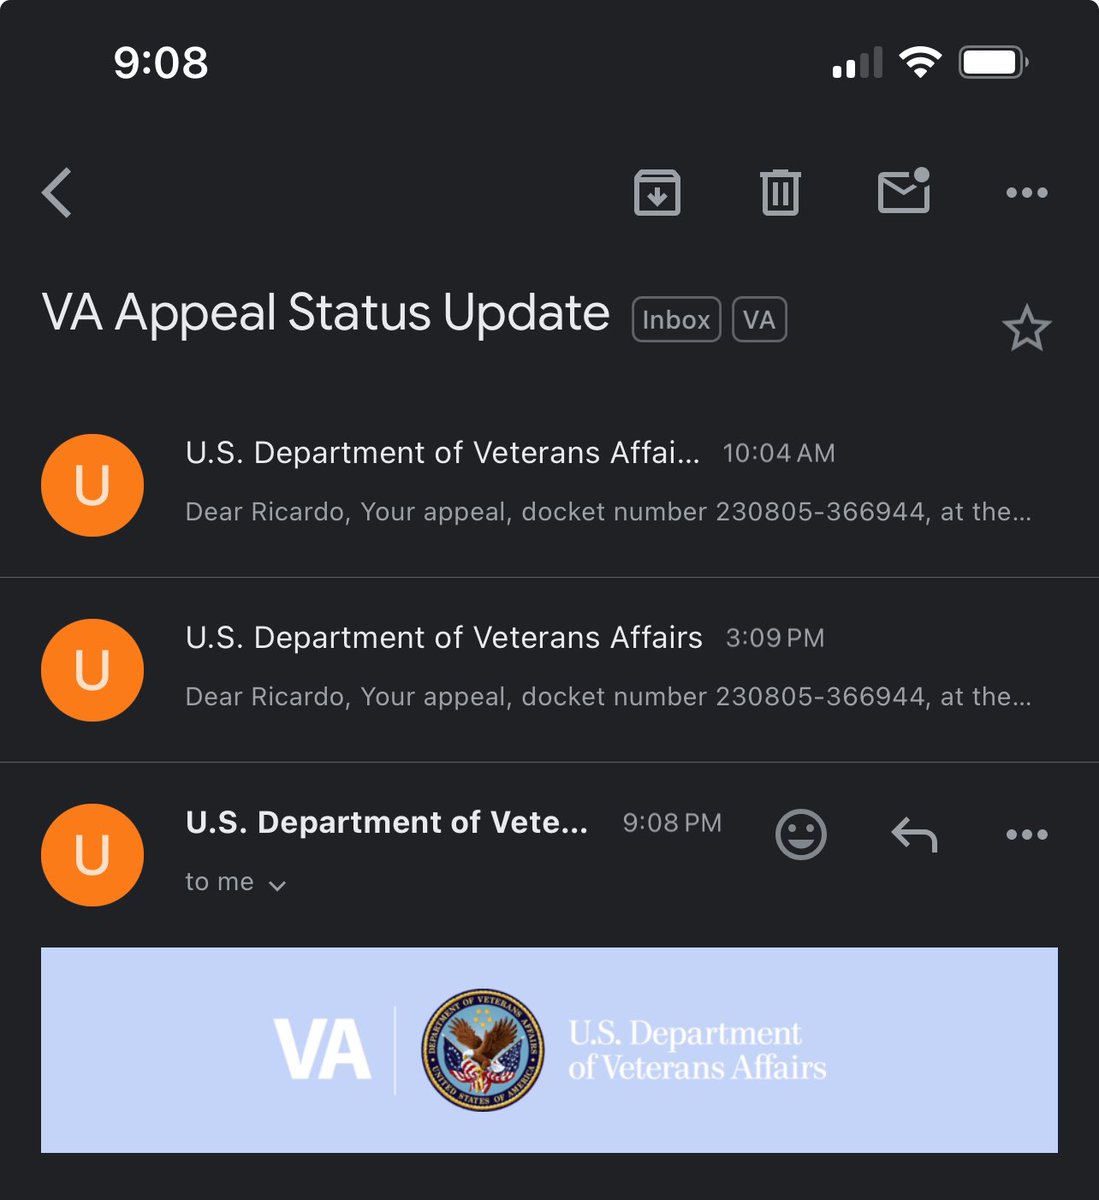 OK @DeptVetAffairs I get it. My appeal is still pending. Thanks for the updates every few hours today!